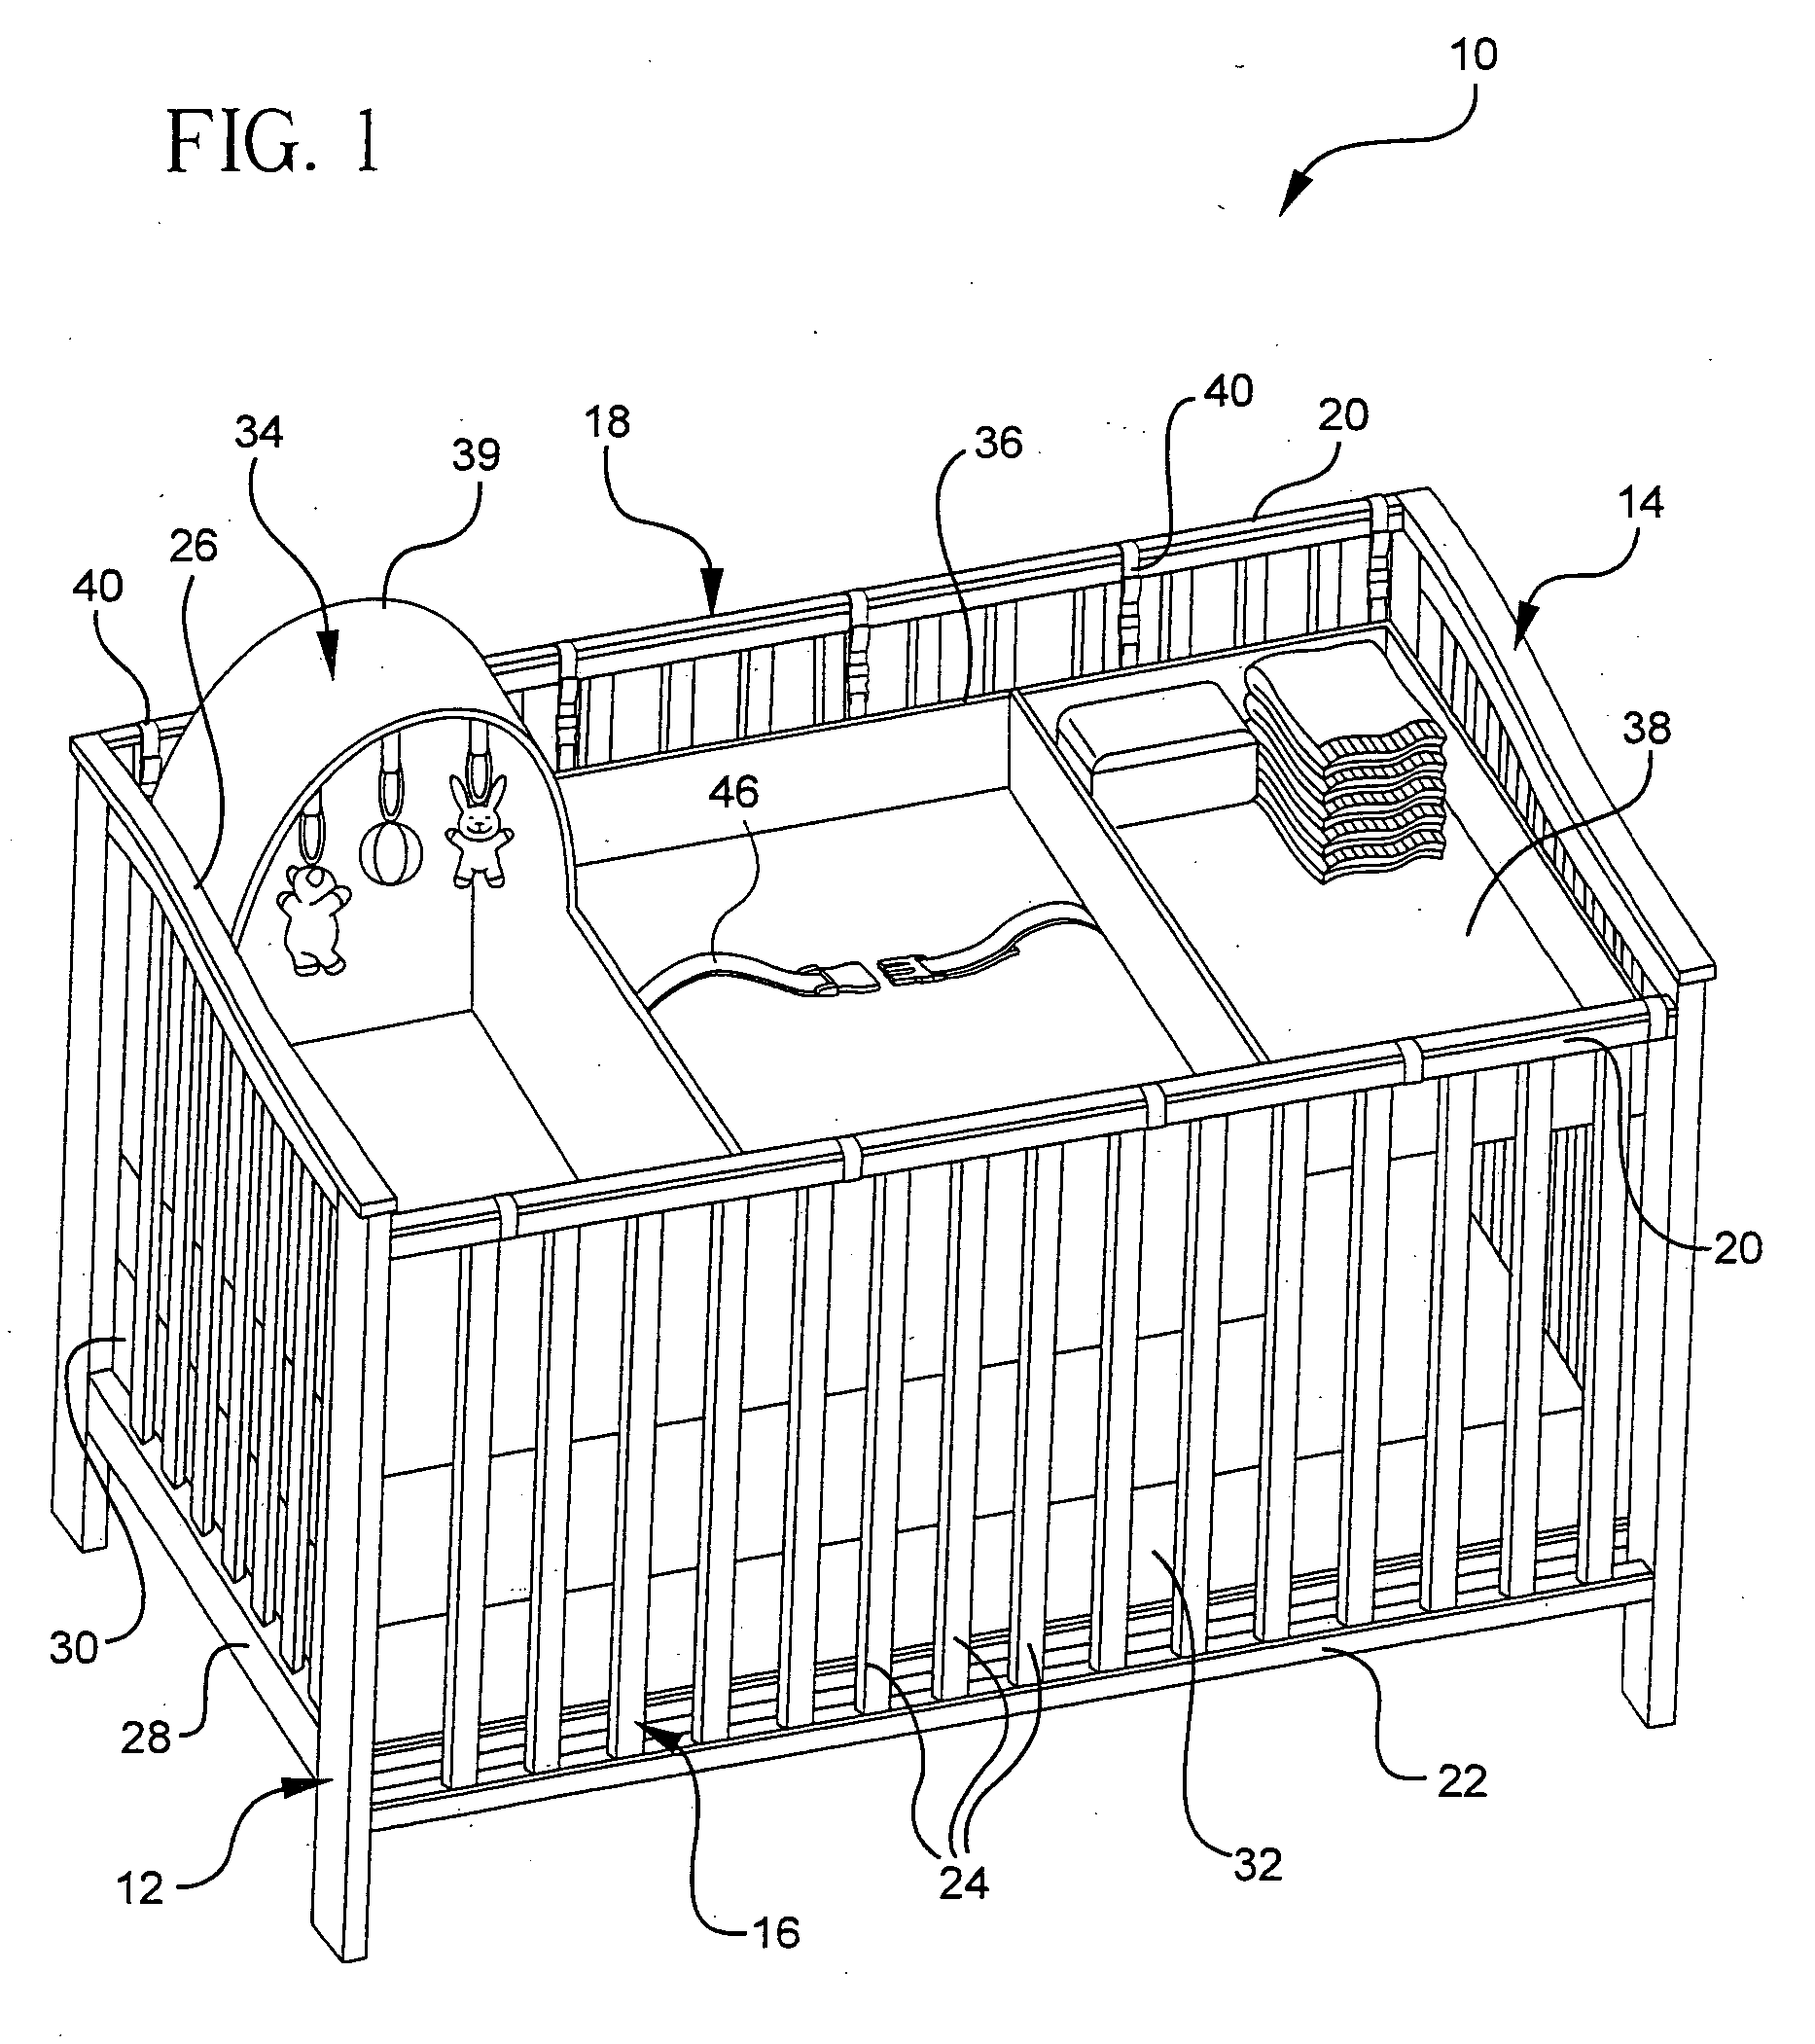 Crib and bassinet assembly